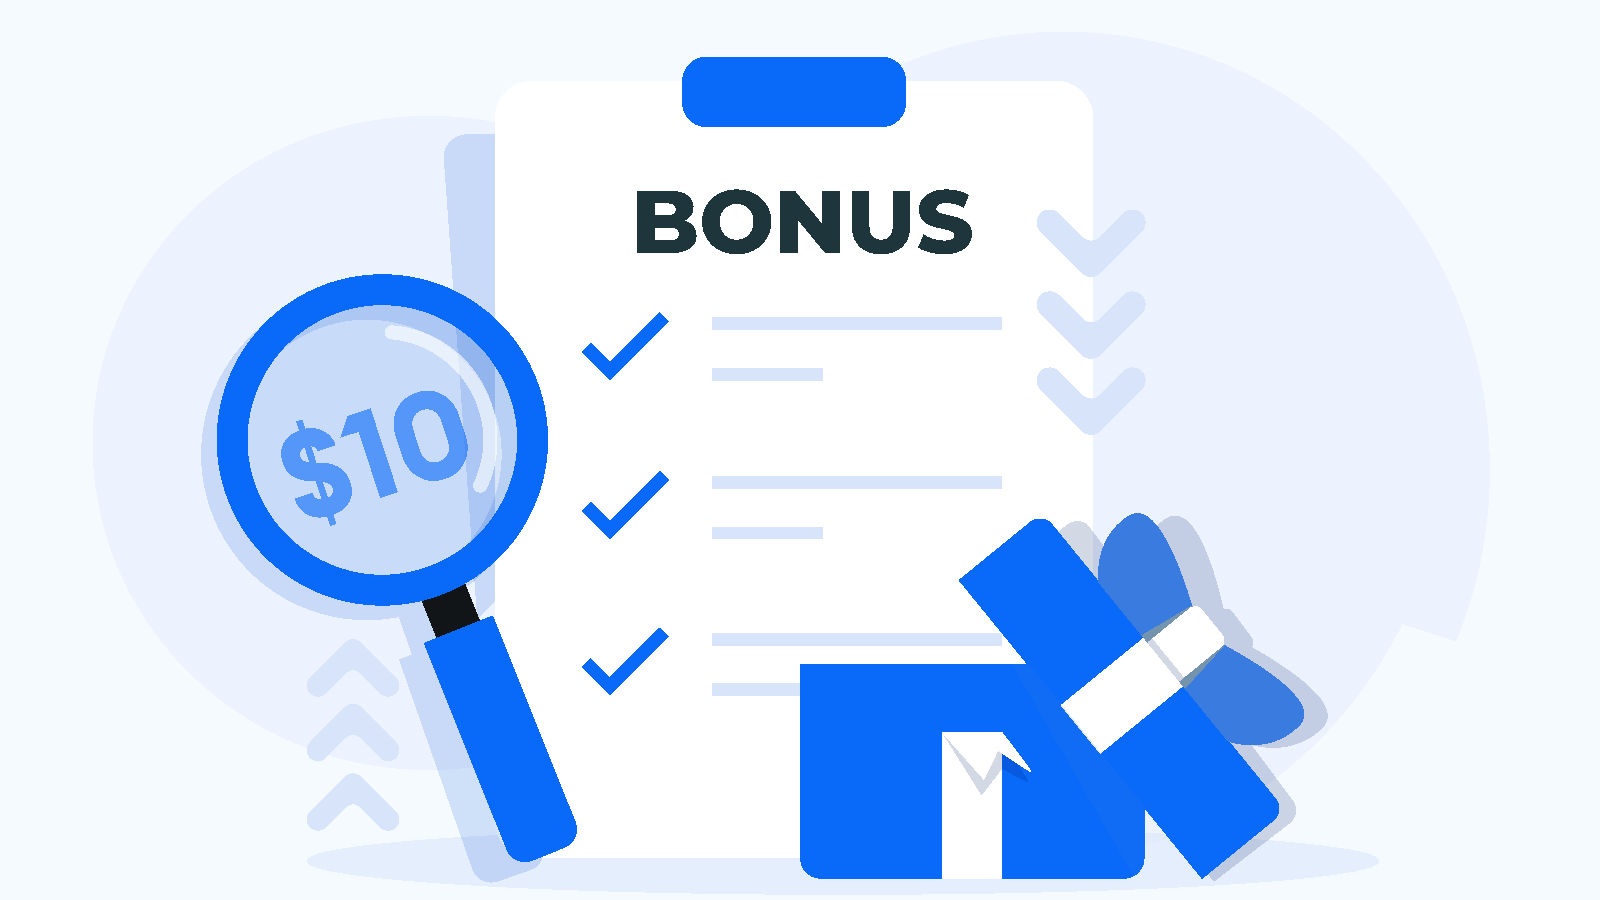 How to Deposit $10 and Claim Your Bonus